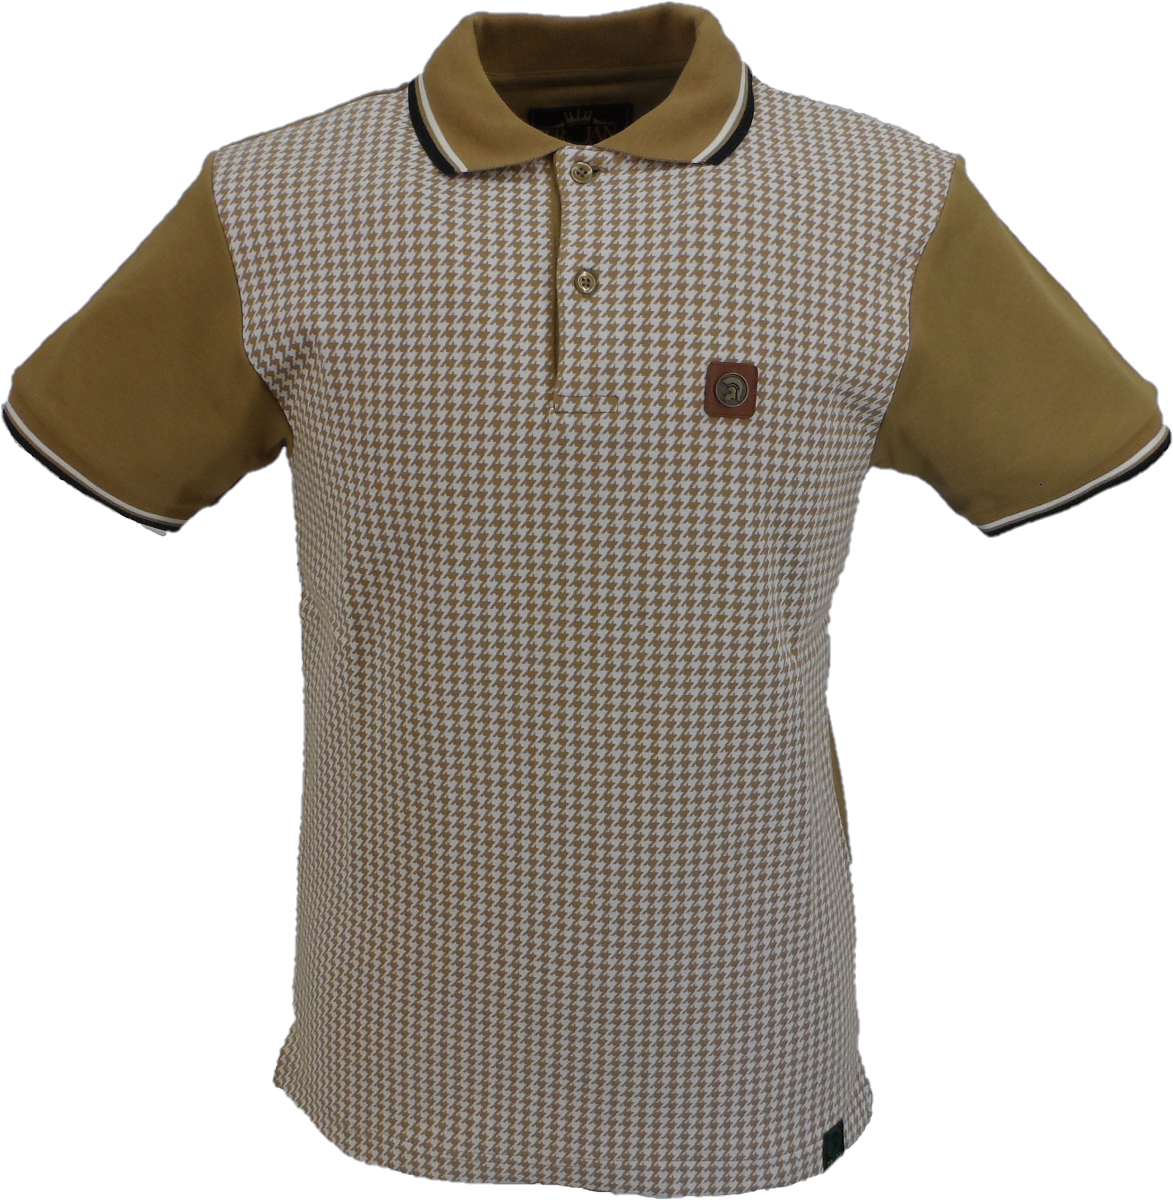 Trojan Records Camel Brown Jacquard Houndstooth Front Panel Polo Shirt